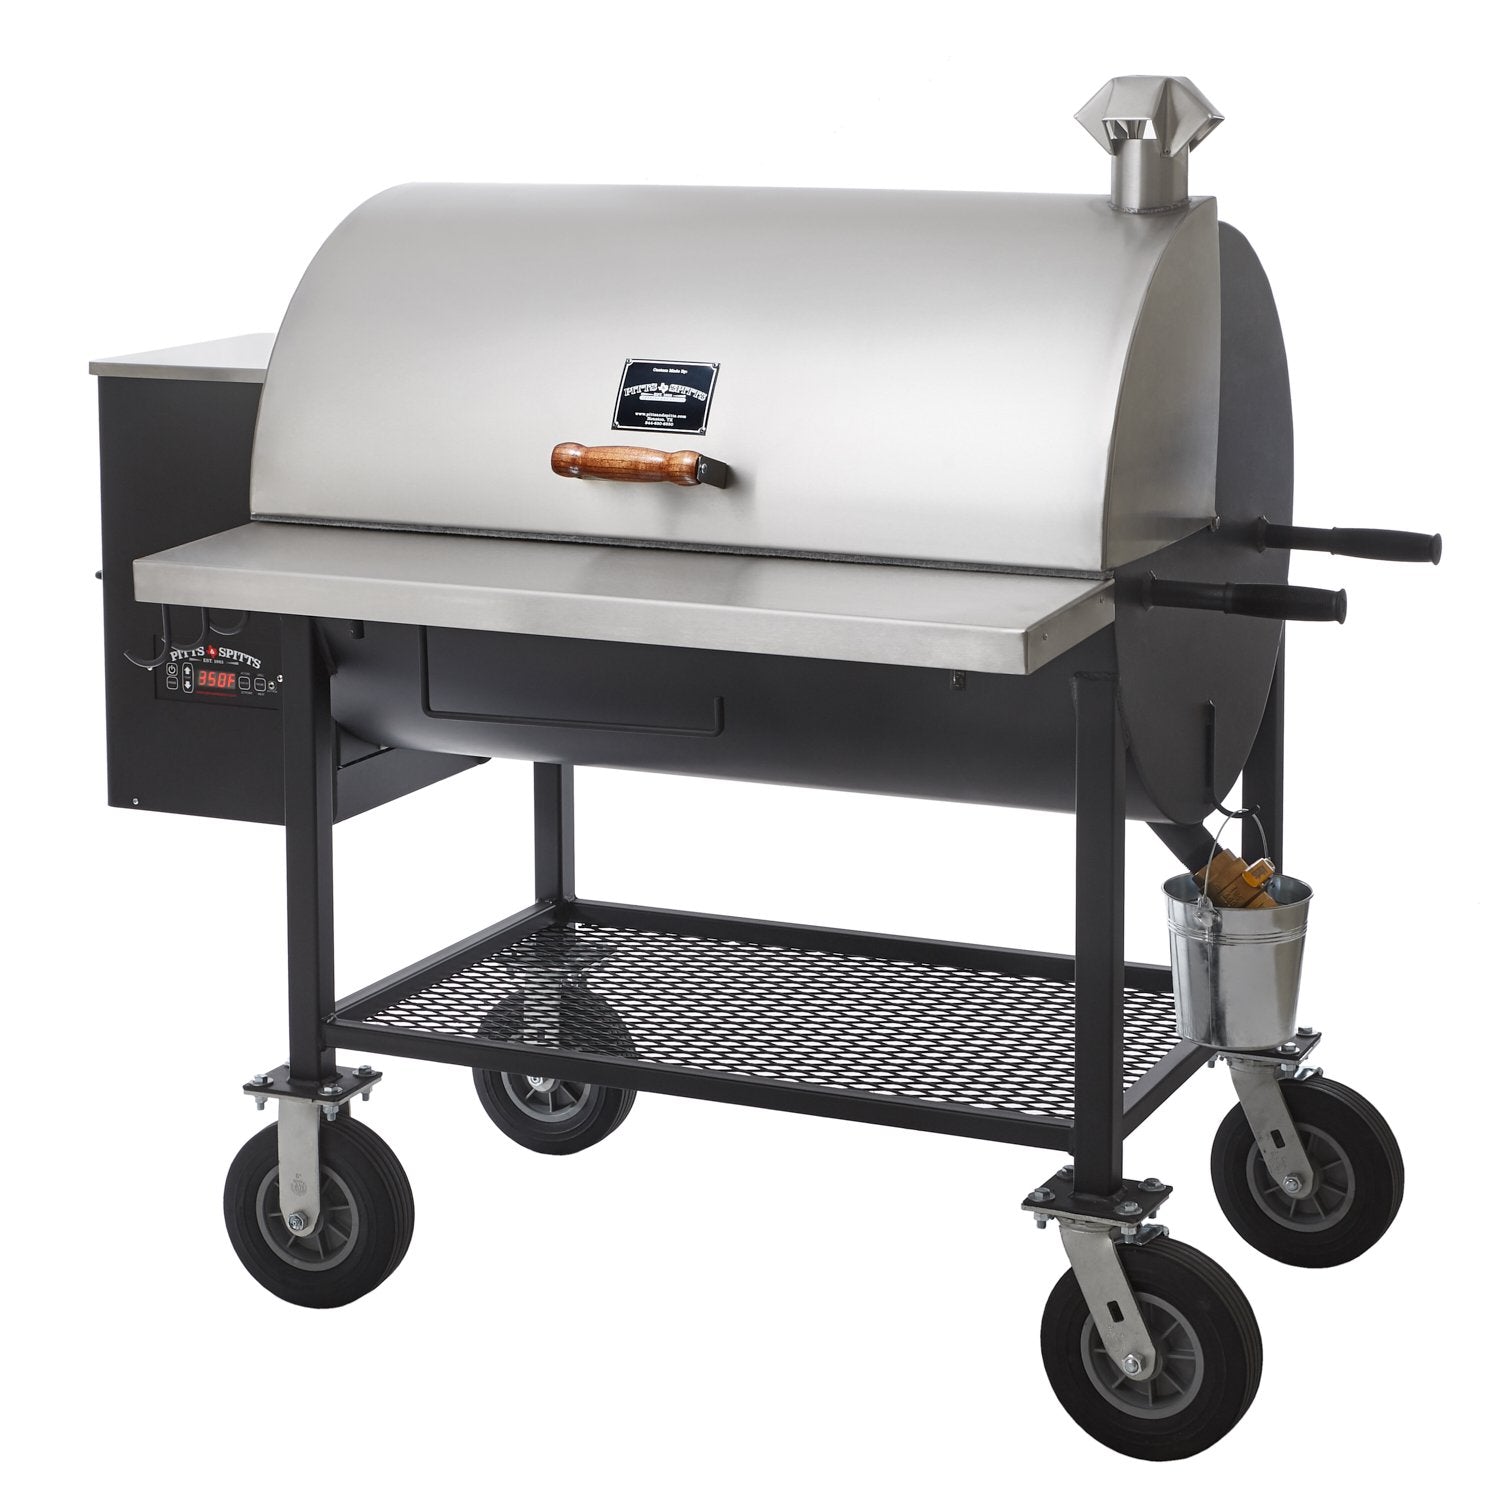 Pitts and Spitts Maverick 1250 Pellet Grill